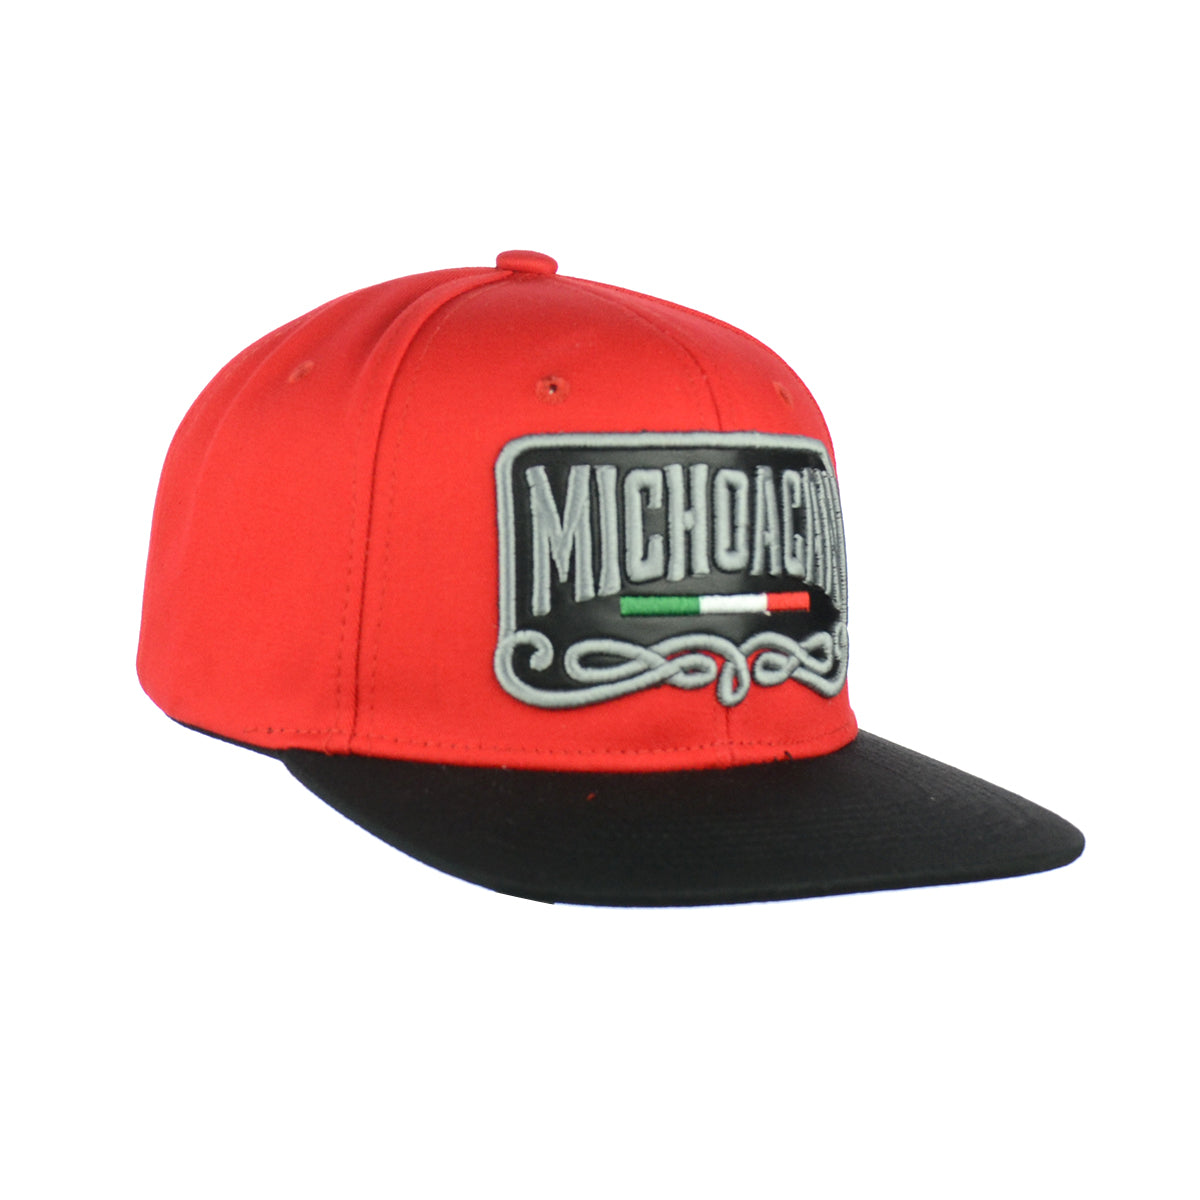 Snapback "Michoacán" Hat Embroidered